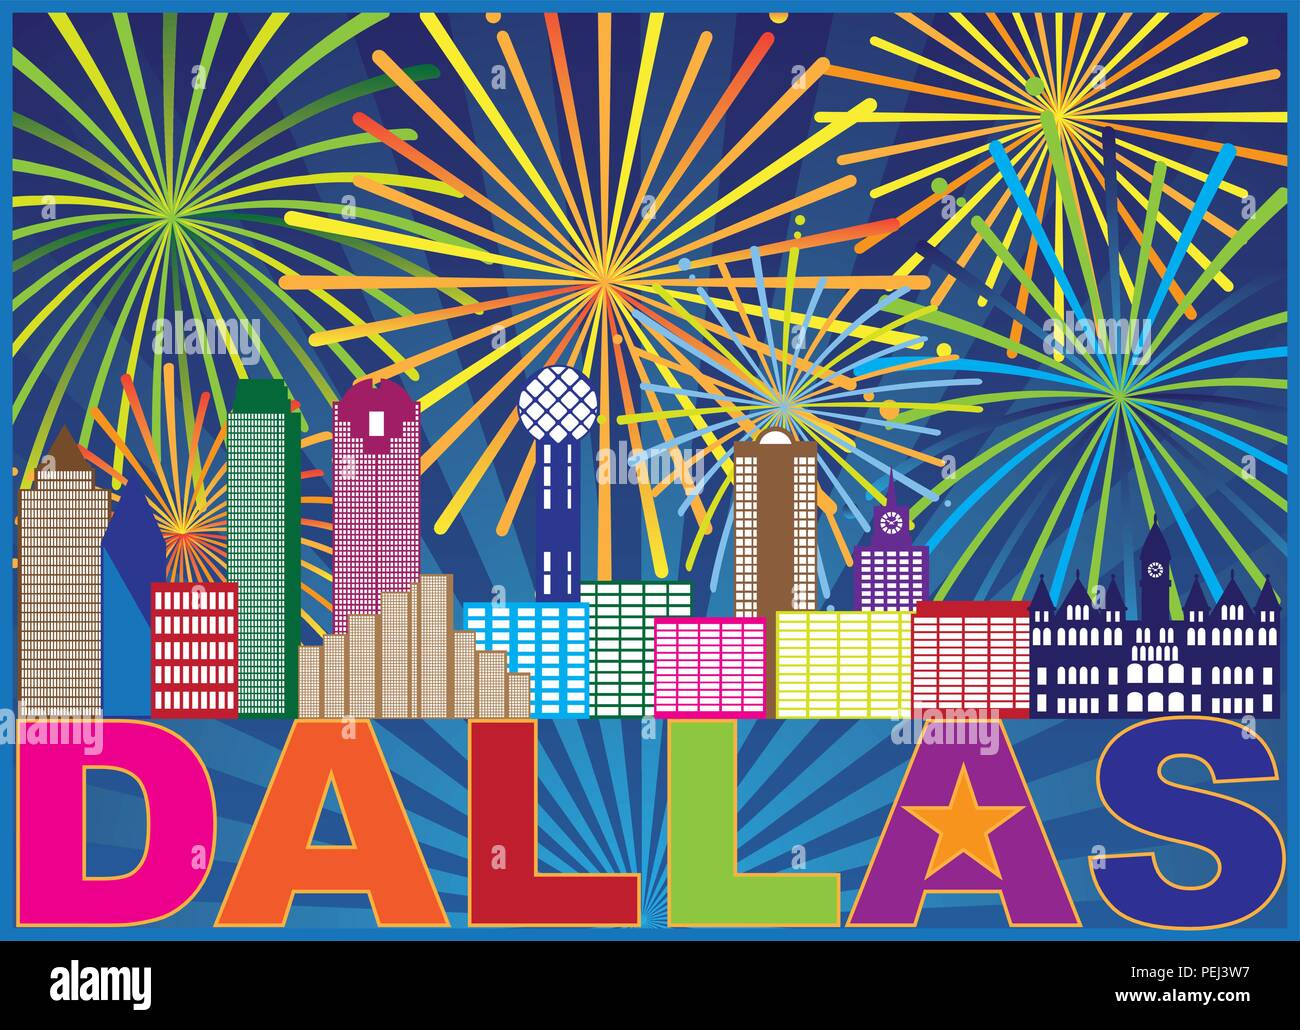 Dallas Texas City Skyline Outline Fireworks Display with Text and Lone Star Abstract Illustration Stock Vector